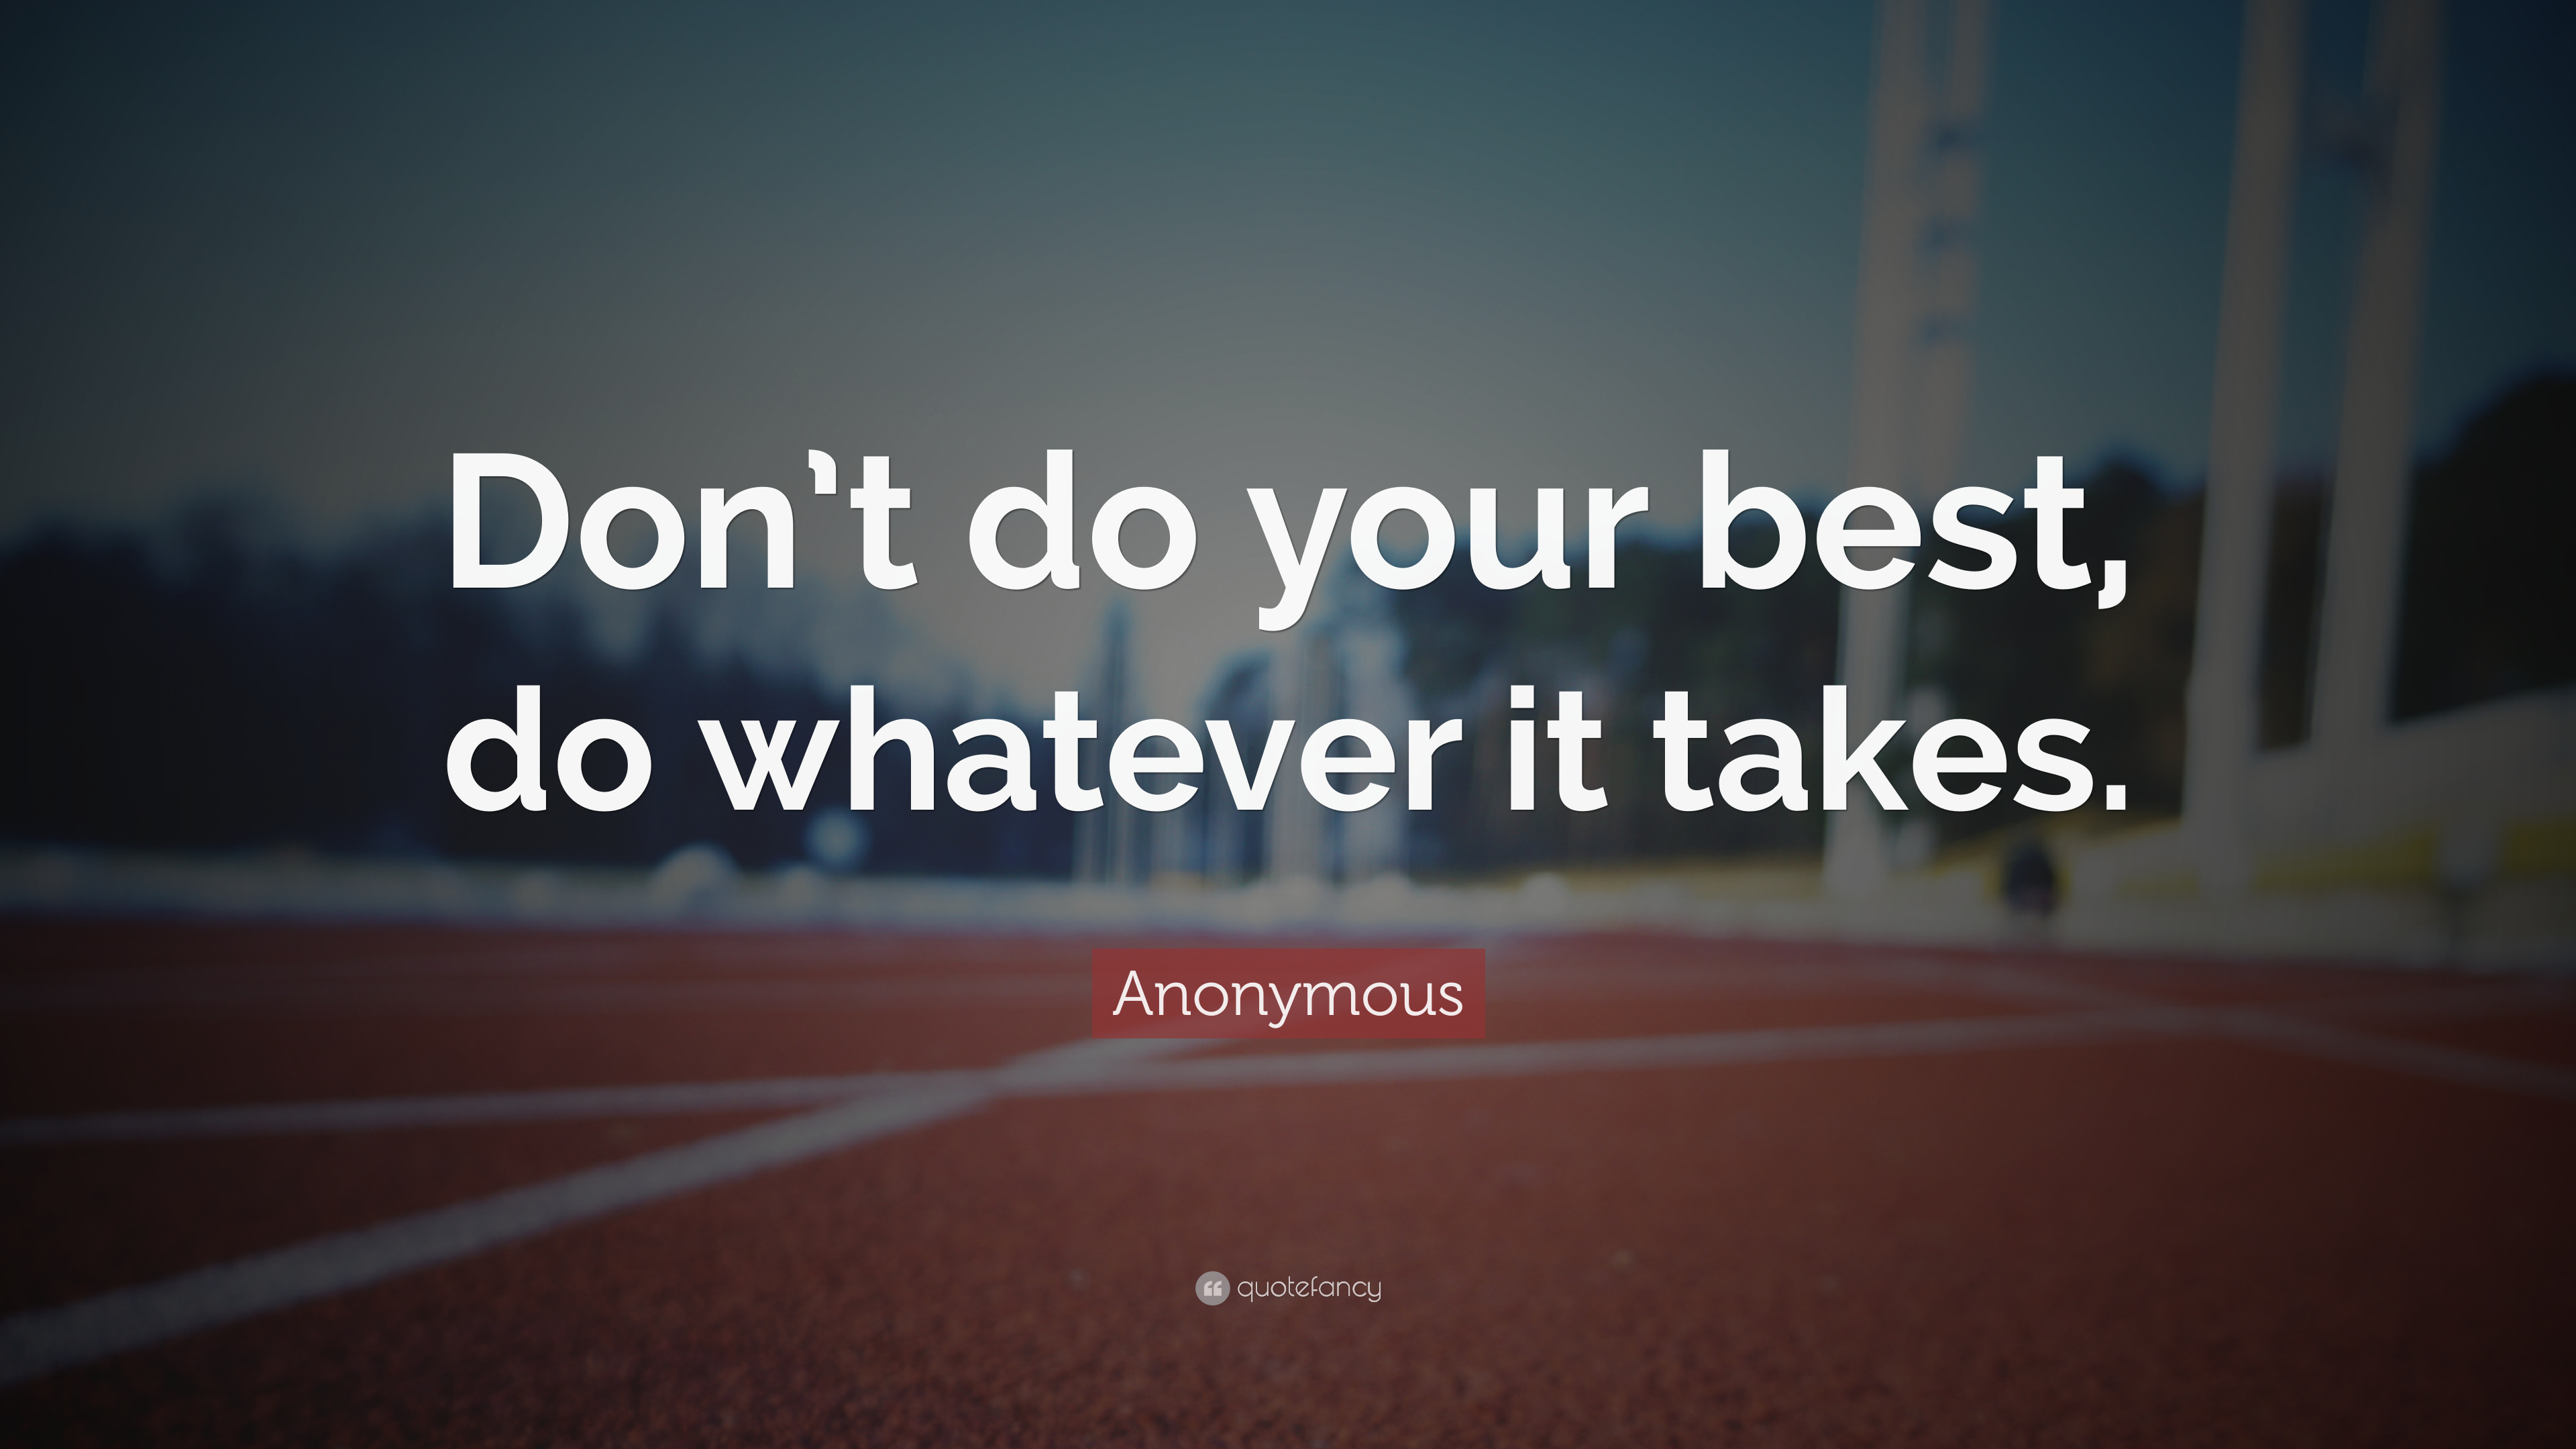 Anonymous Quote: “Don't do your best, do whatever it takes.”